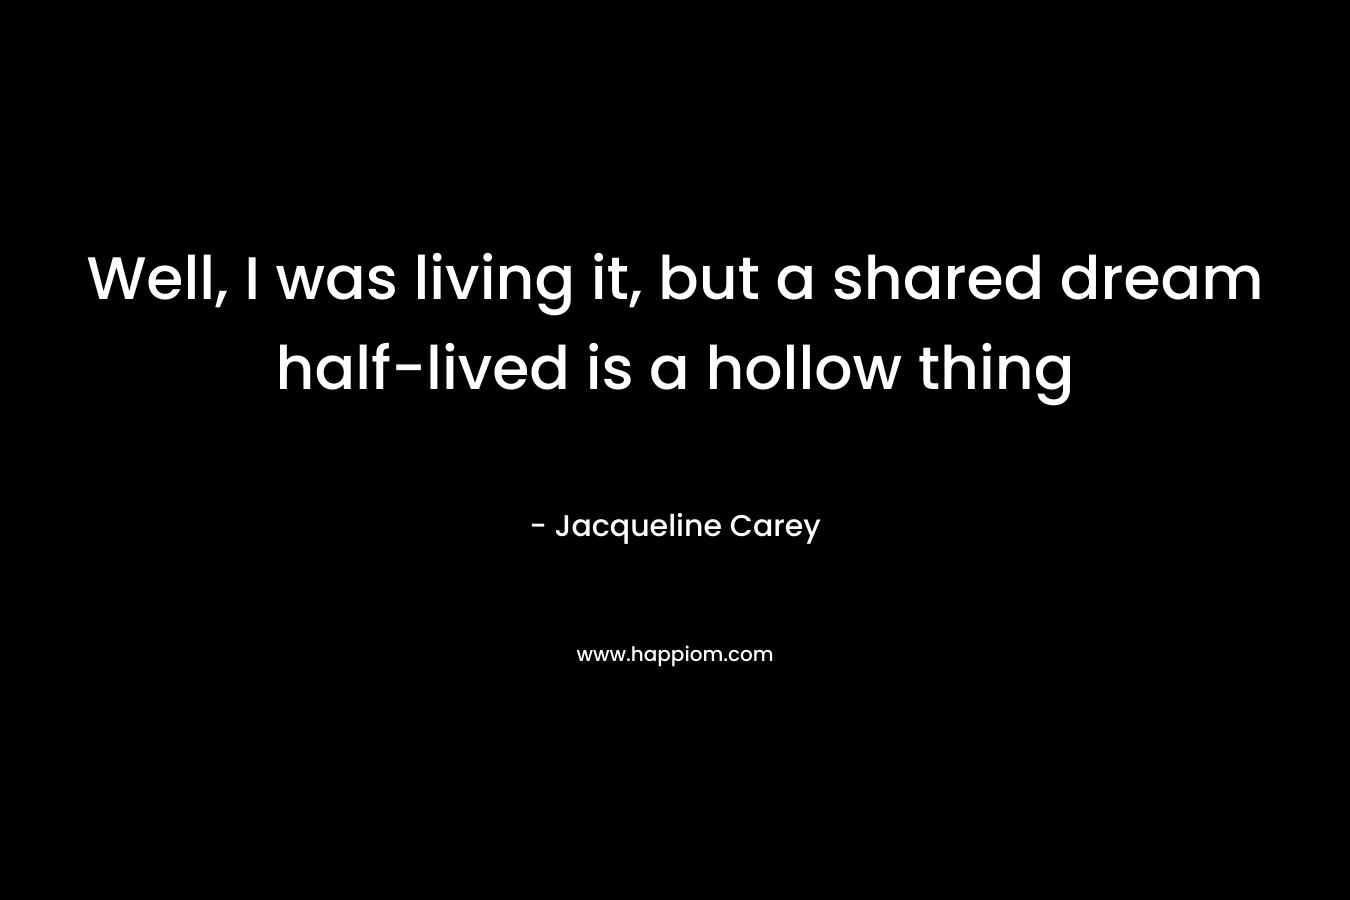 Well, I was living it, but a shared dream half-lived is a hollow thing – Jacqueline Carey